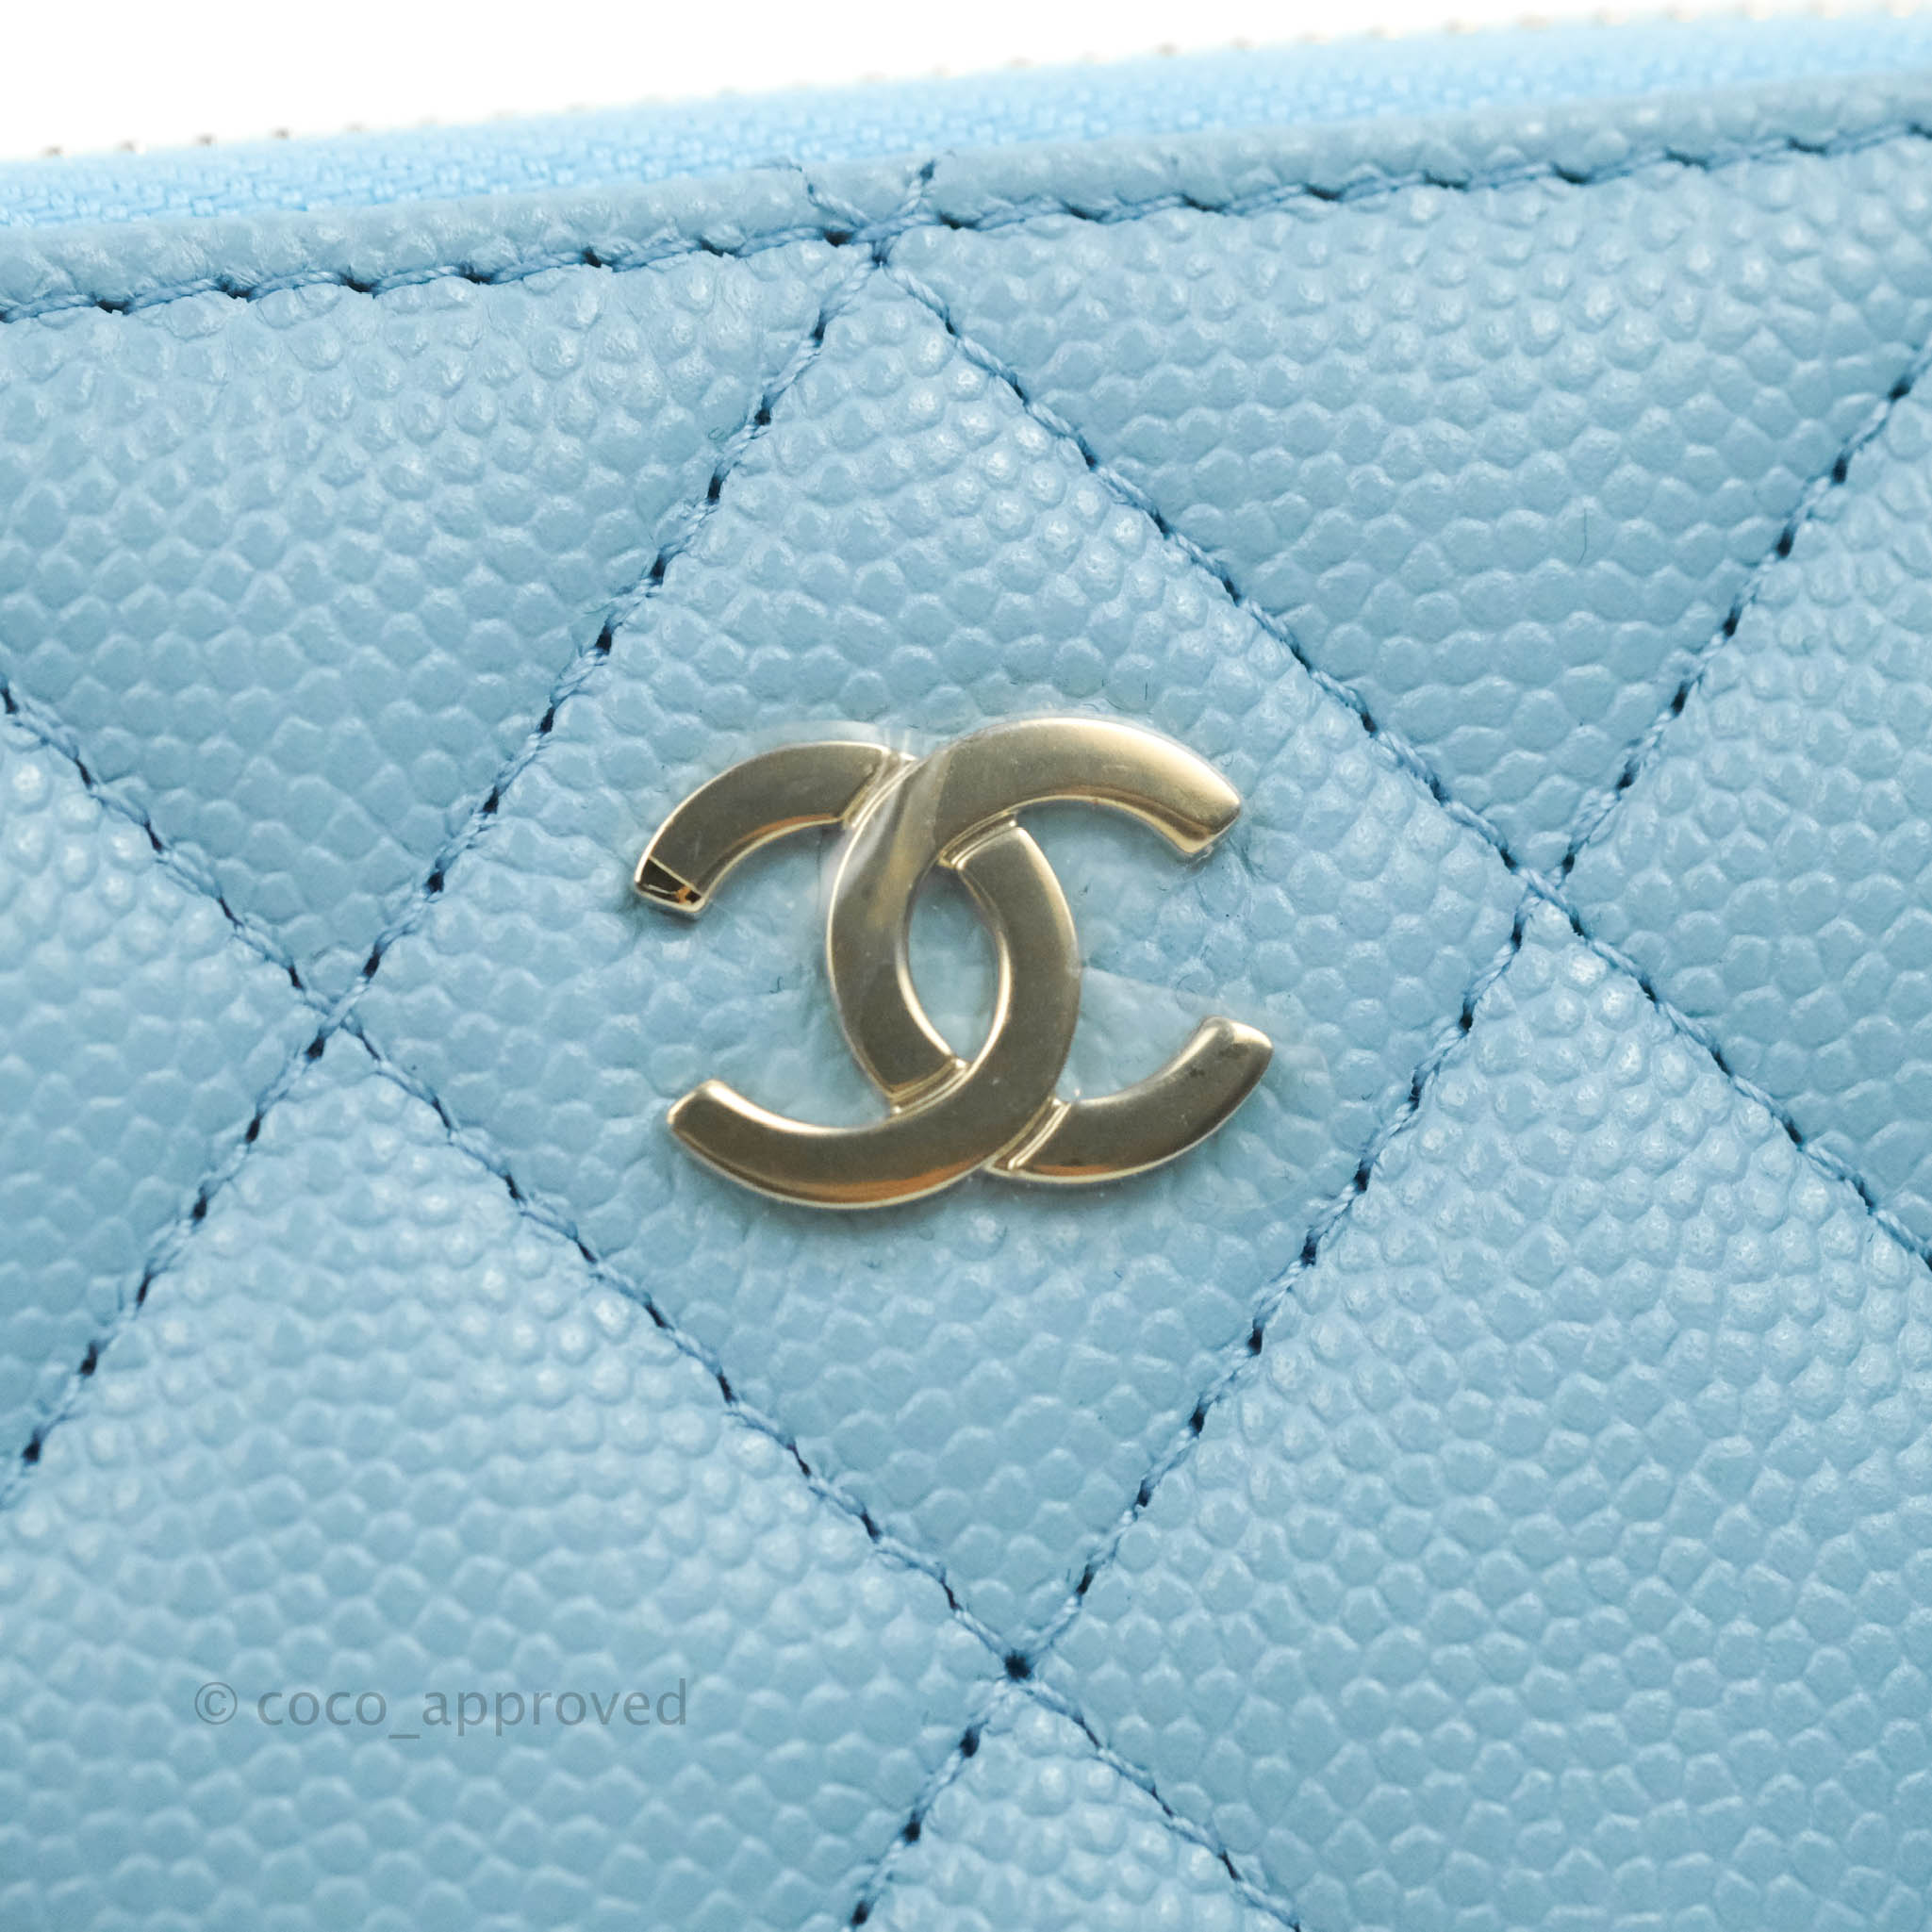 CHANEL Caviar Quilted French New Wave Zip Coin Purse Light Green 1263388